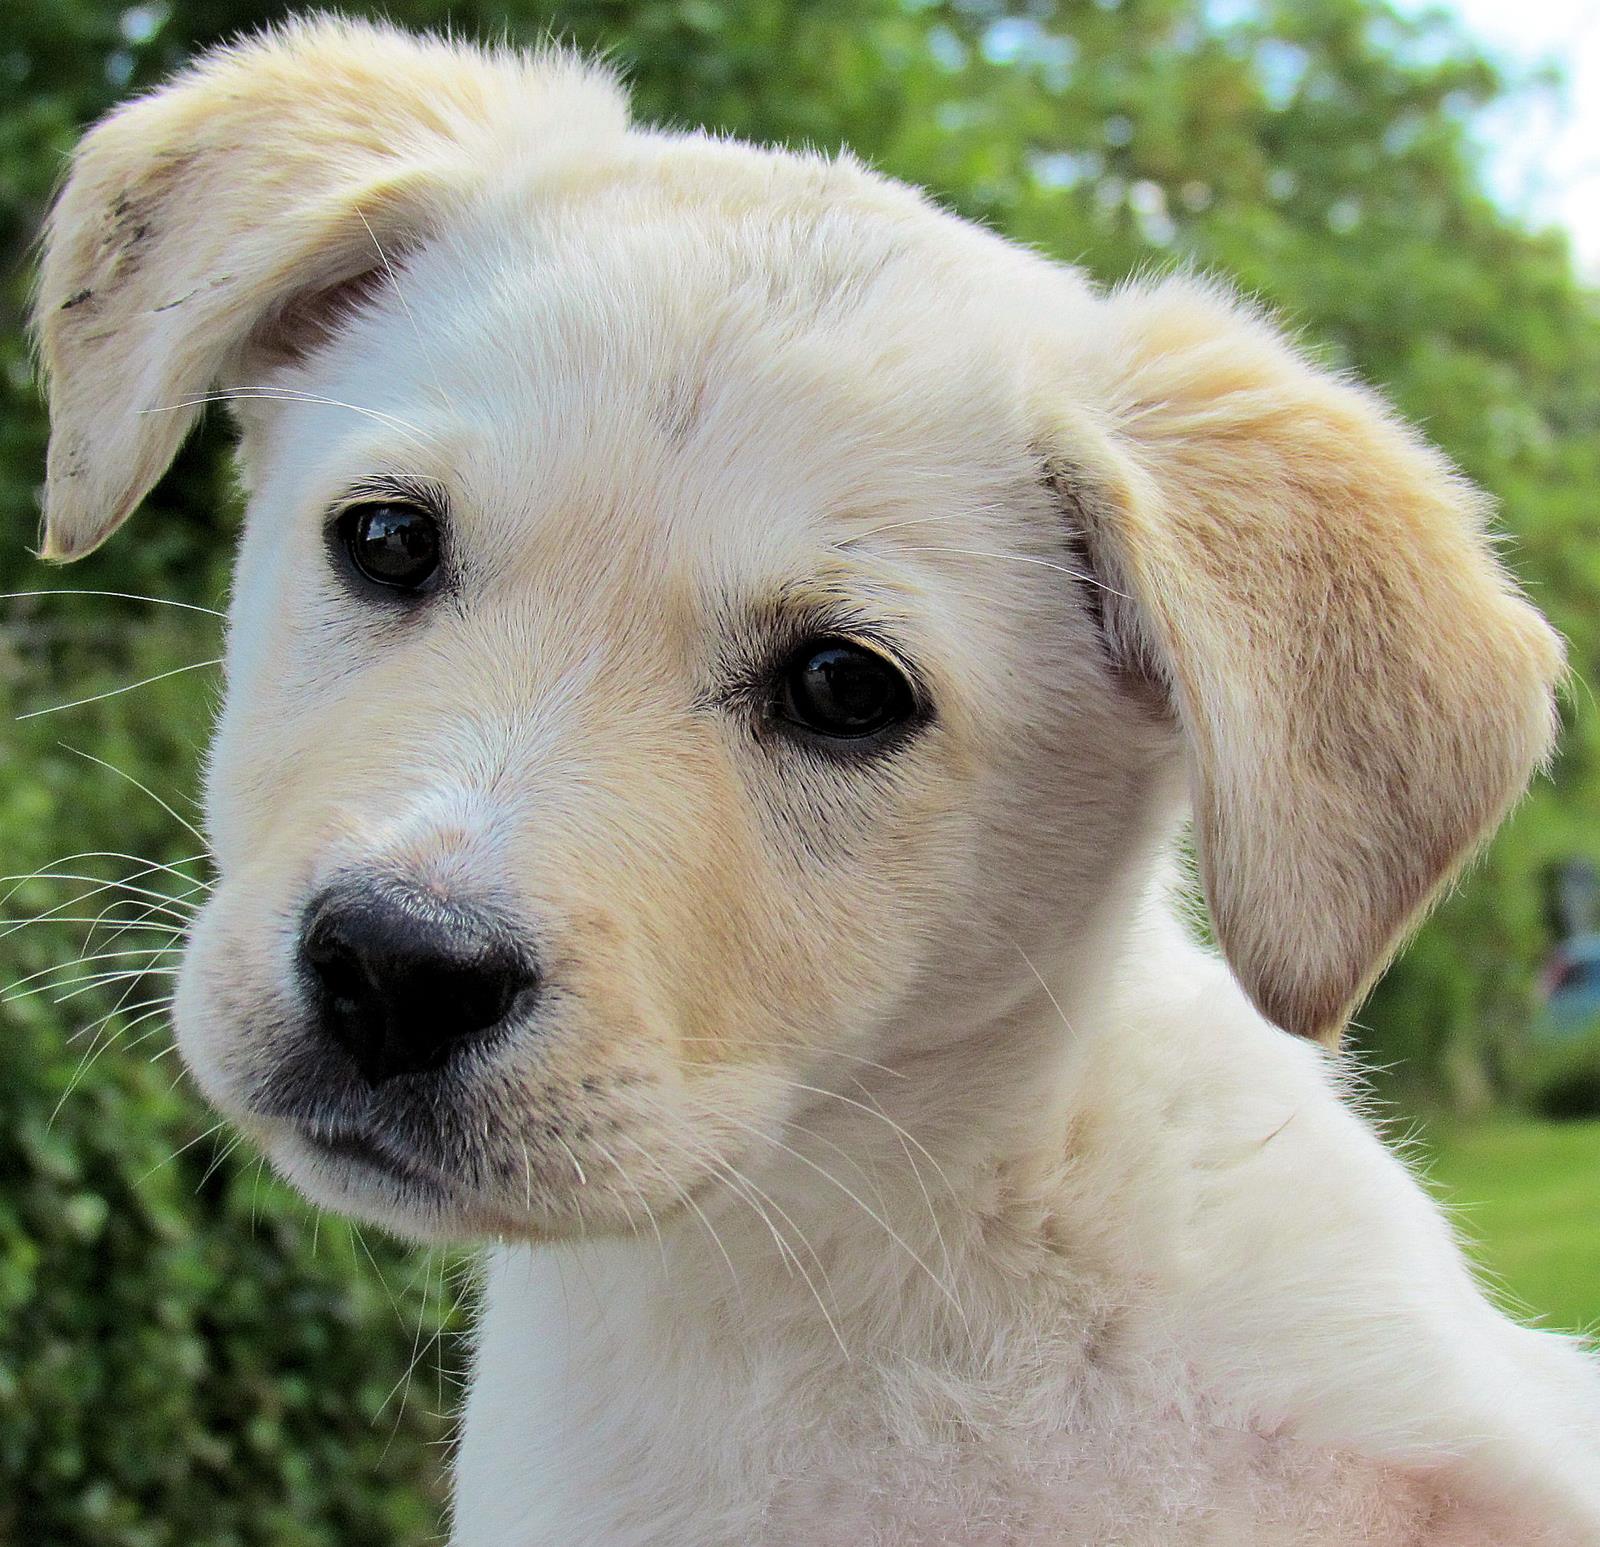 Why a puppy should be kept off the Christmas wishlist